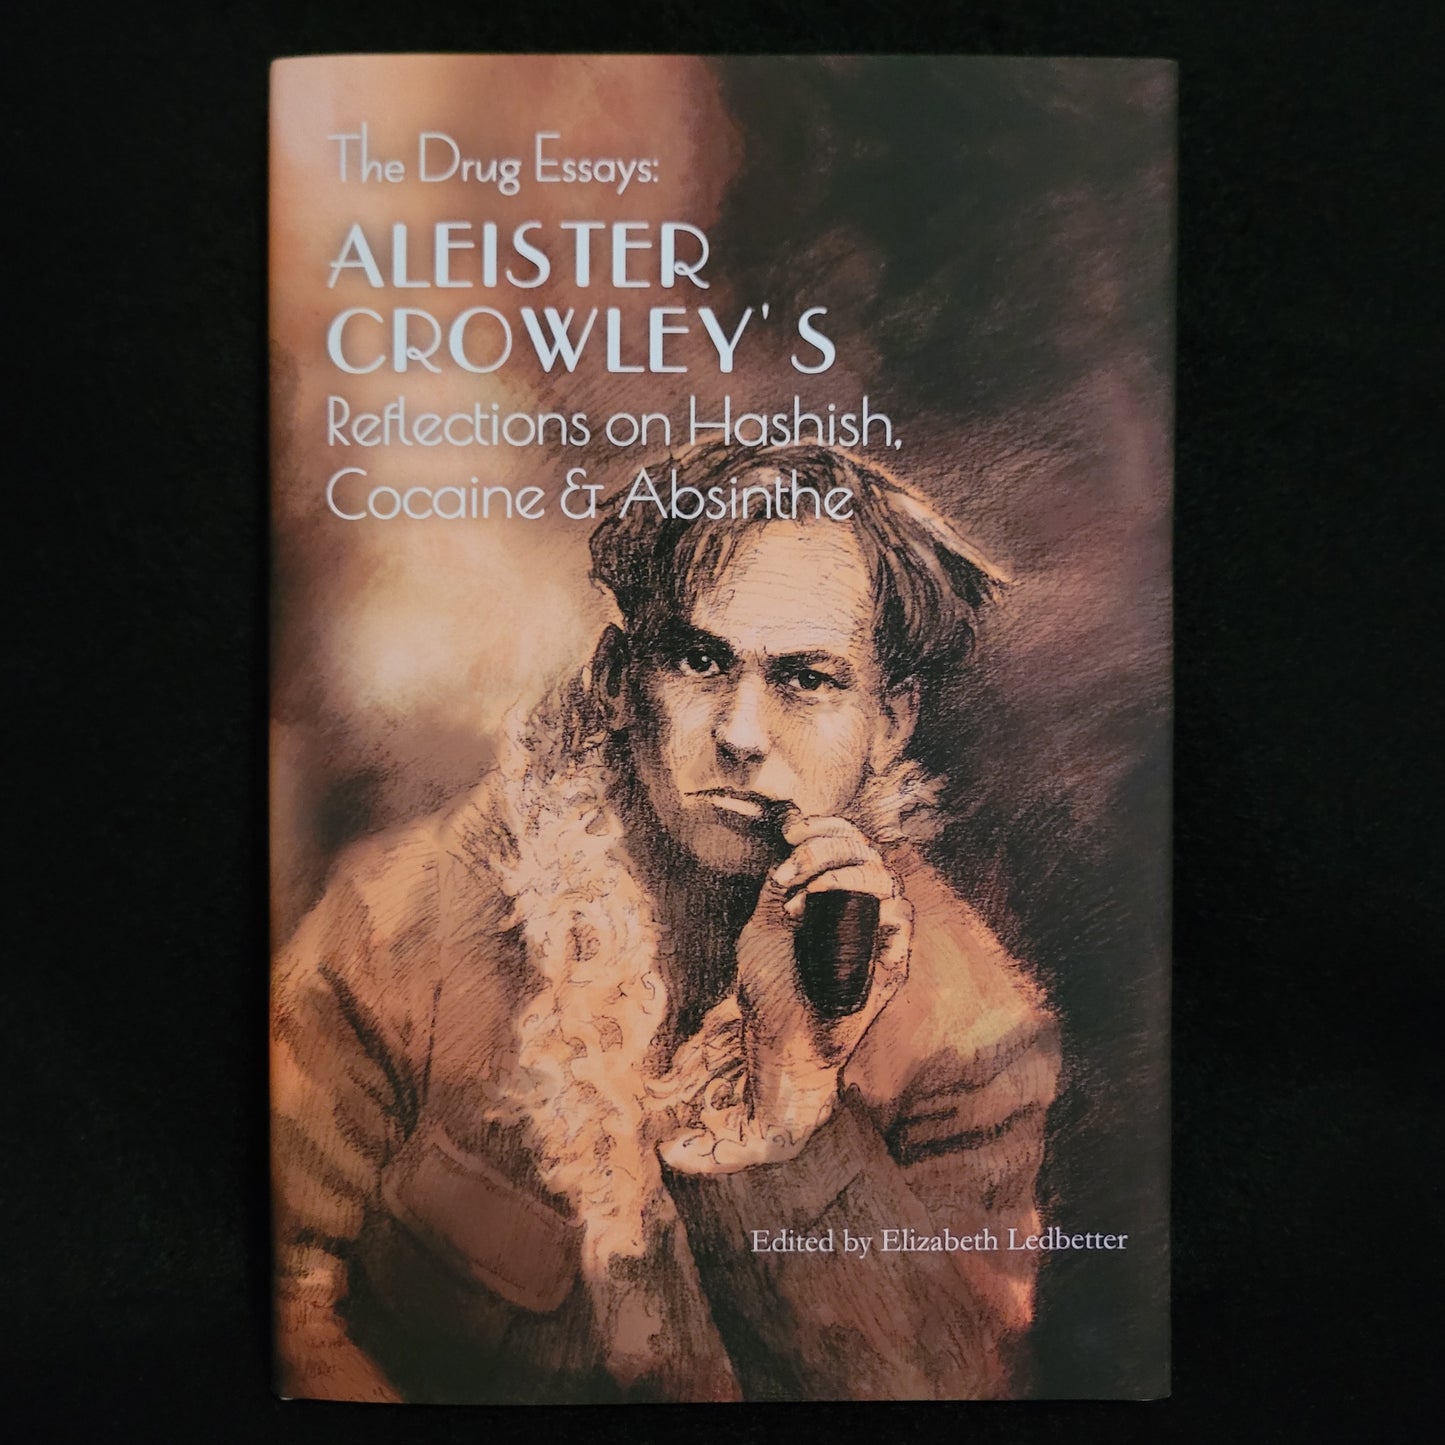 The Drug Essays: Aleister Crowley's Reflections on Hashish, Cocaine & Absinthe by Aleister Crowley (Mockingbird Press, 2019) Hardcover Edition